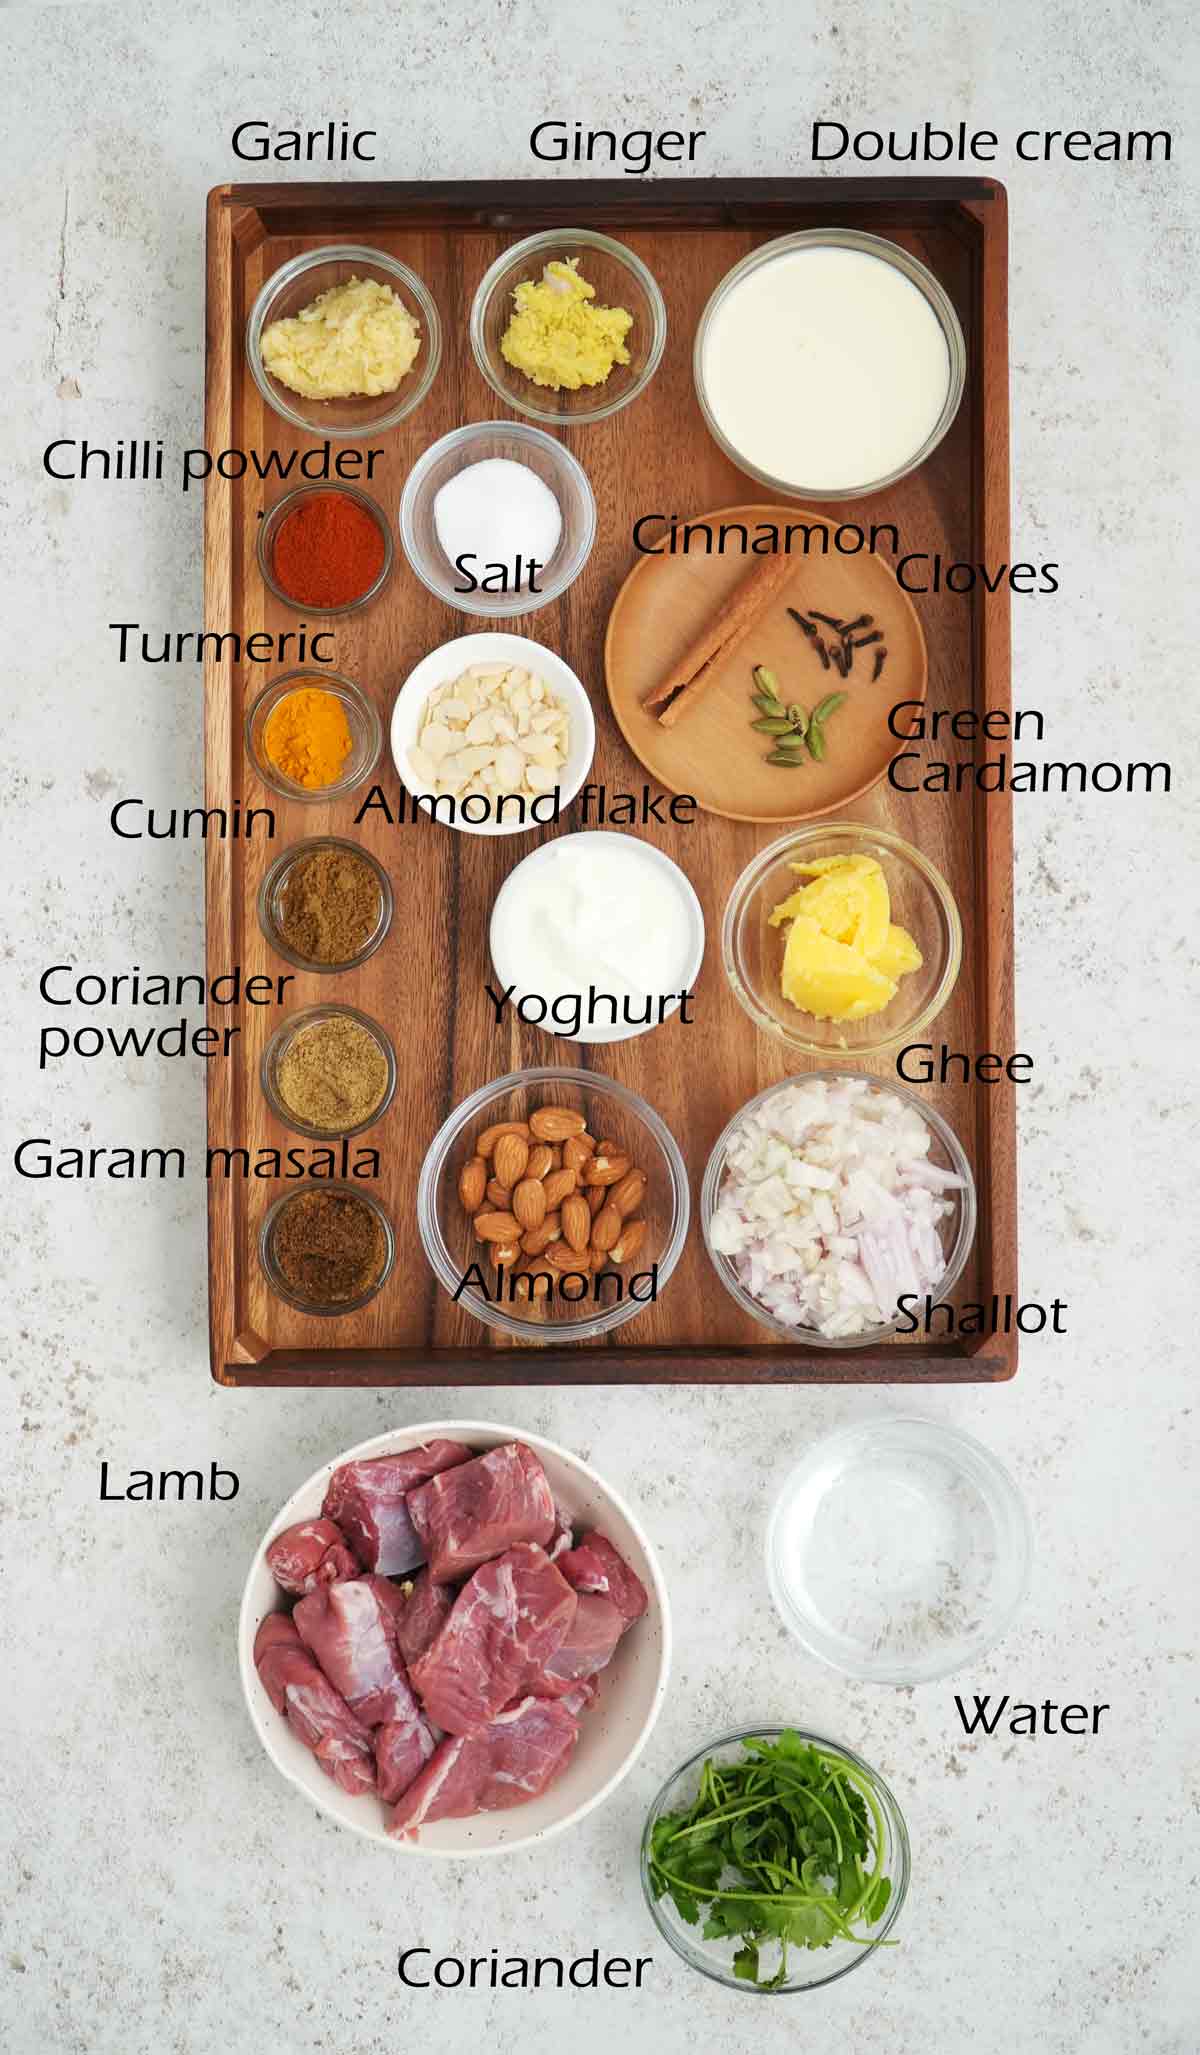 Labelled ingredients displayed on the white table. 